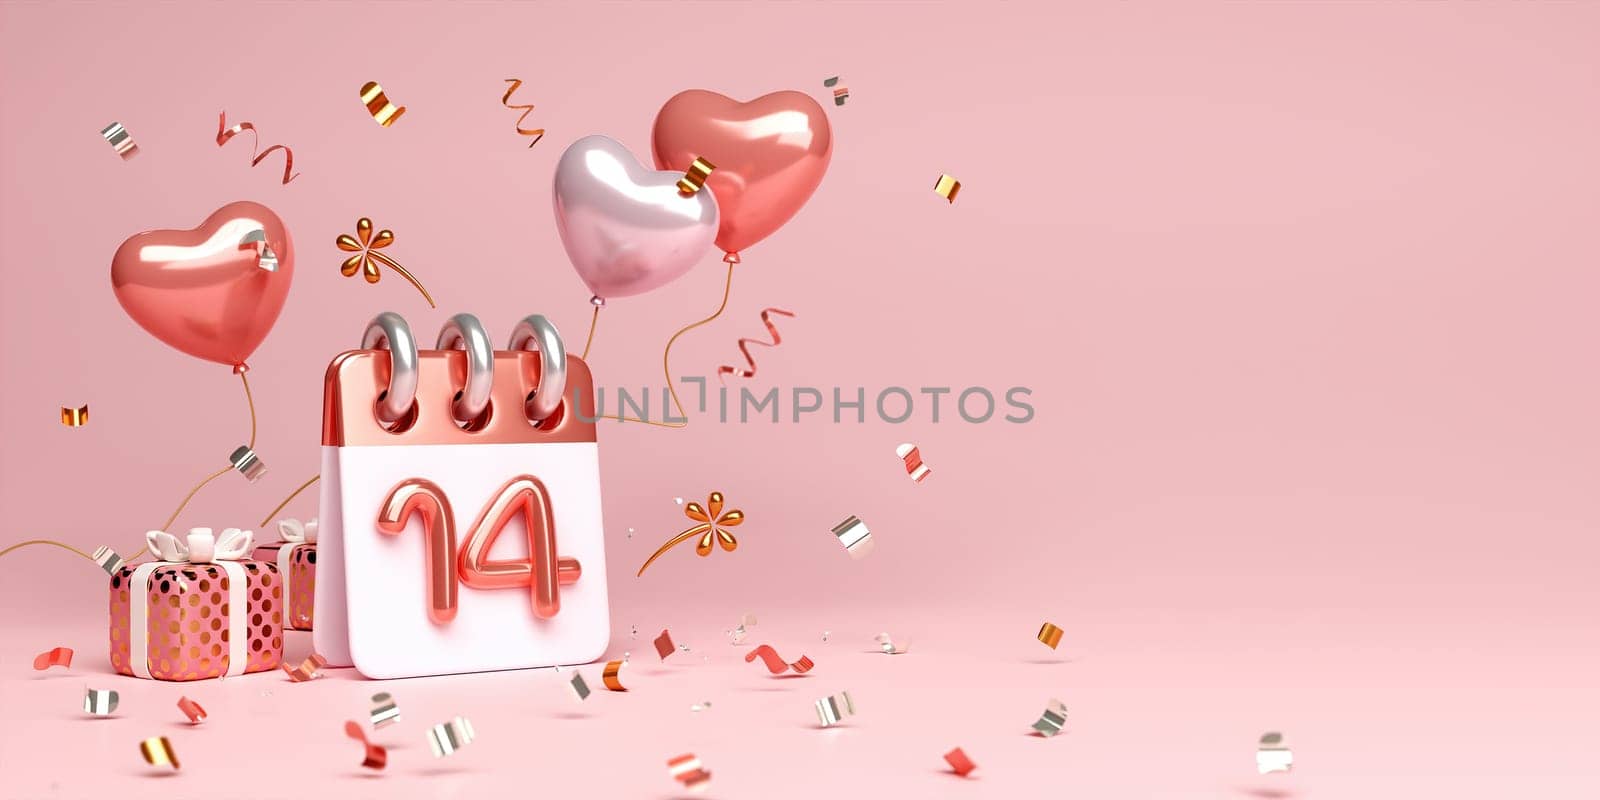 Happy Valentines day background with calendar date 14 February, Rose gold luxury, gift box, glitter, heart shape balloon, copy space text, 3D rendering illustration.